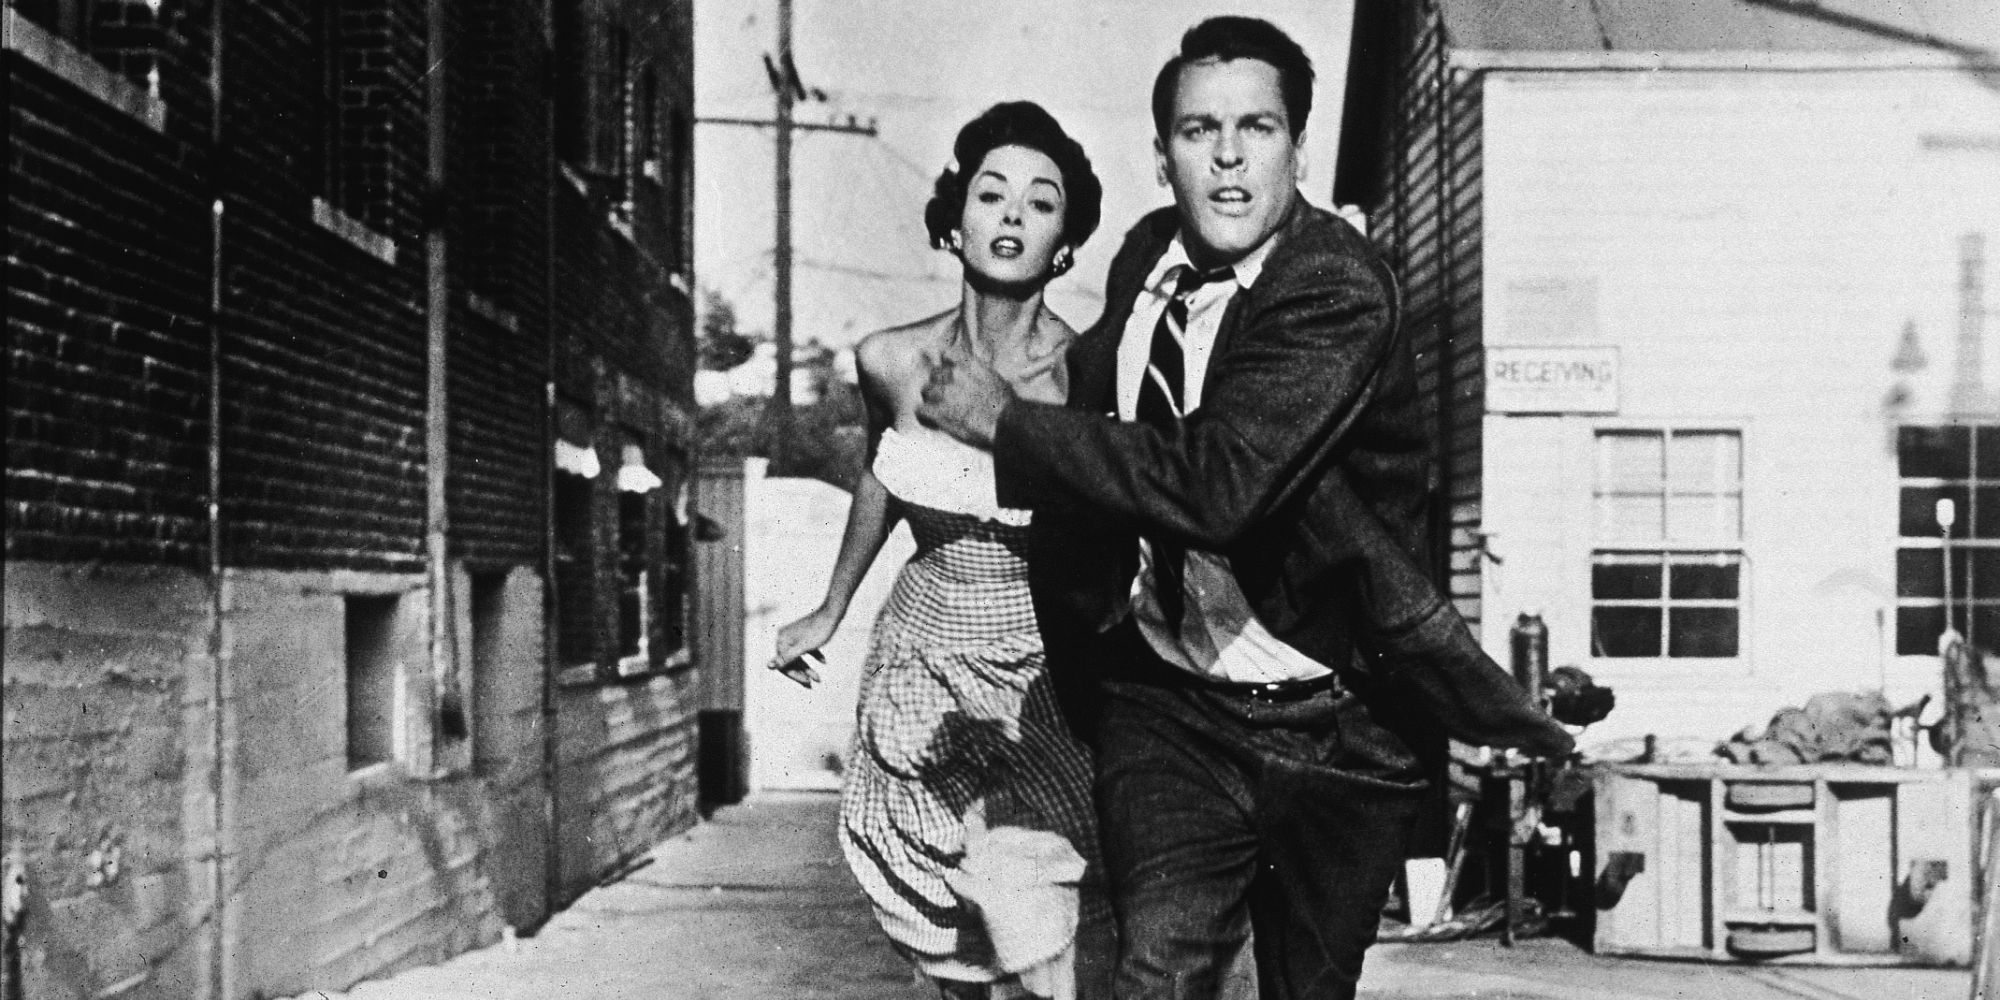 A couple running down a street in Invasion of the Body Snatcher (1956)